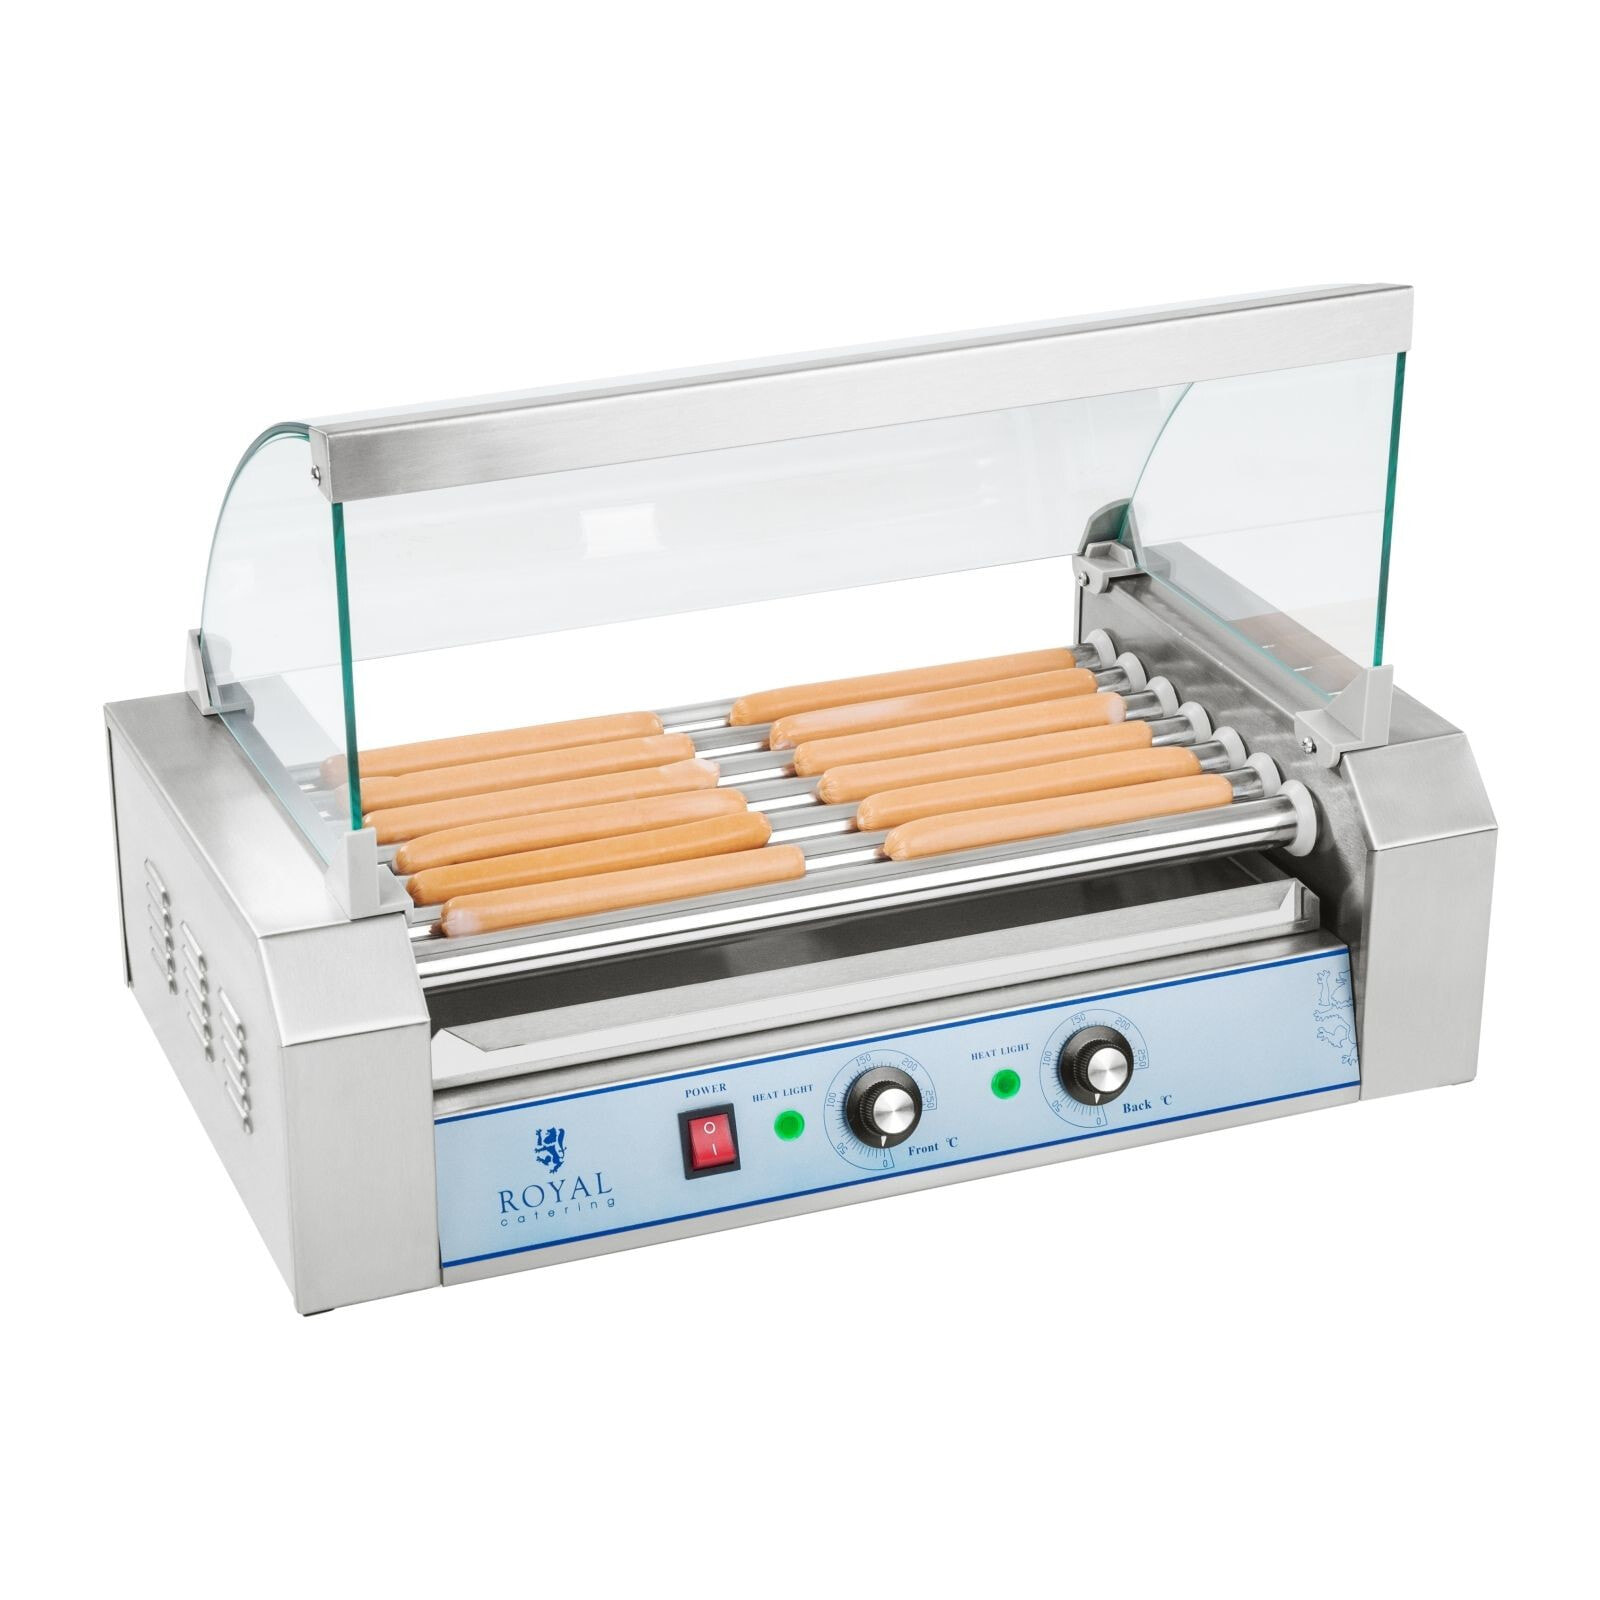 Roller grill with lid. Roller grill